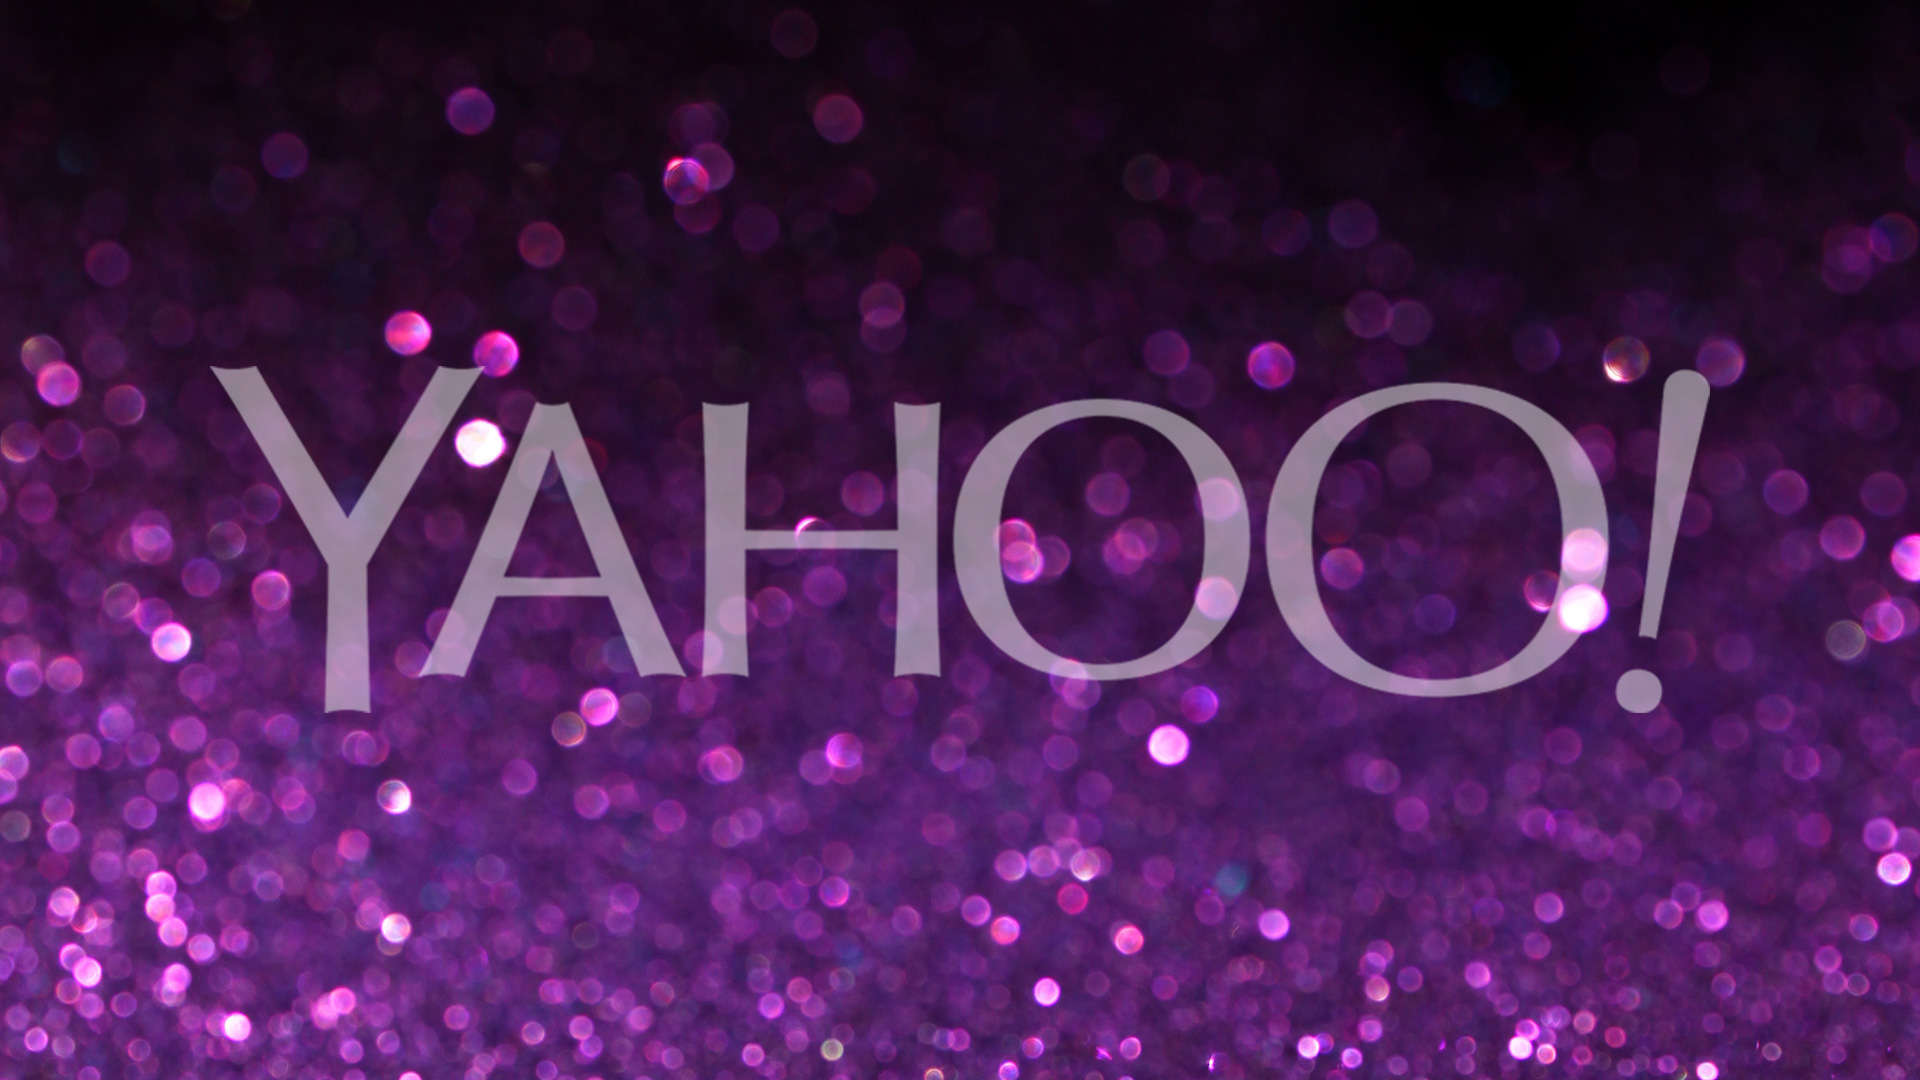 Yahoo HD Wallpapers - HD Great Images